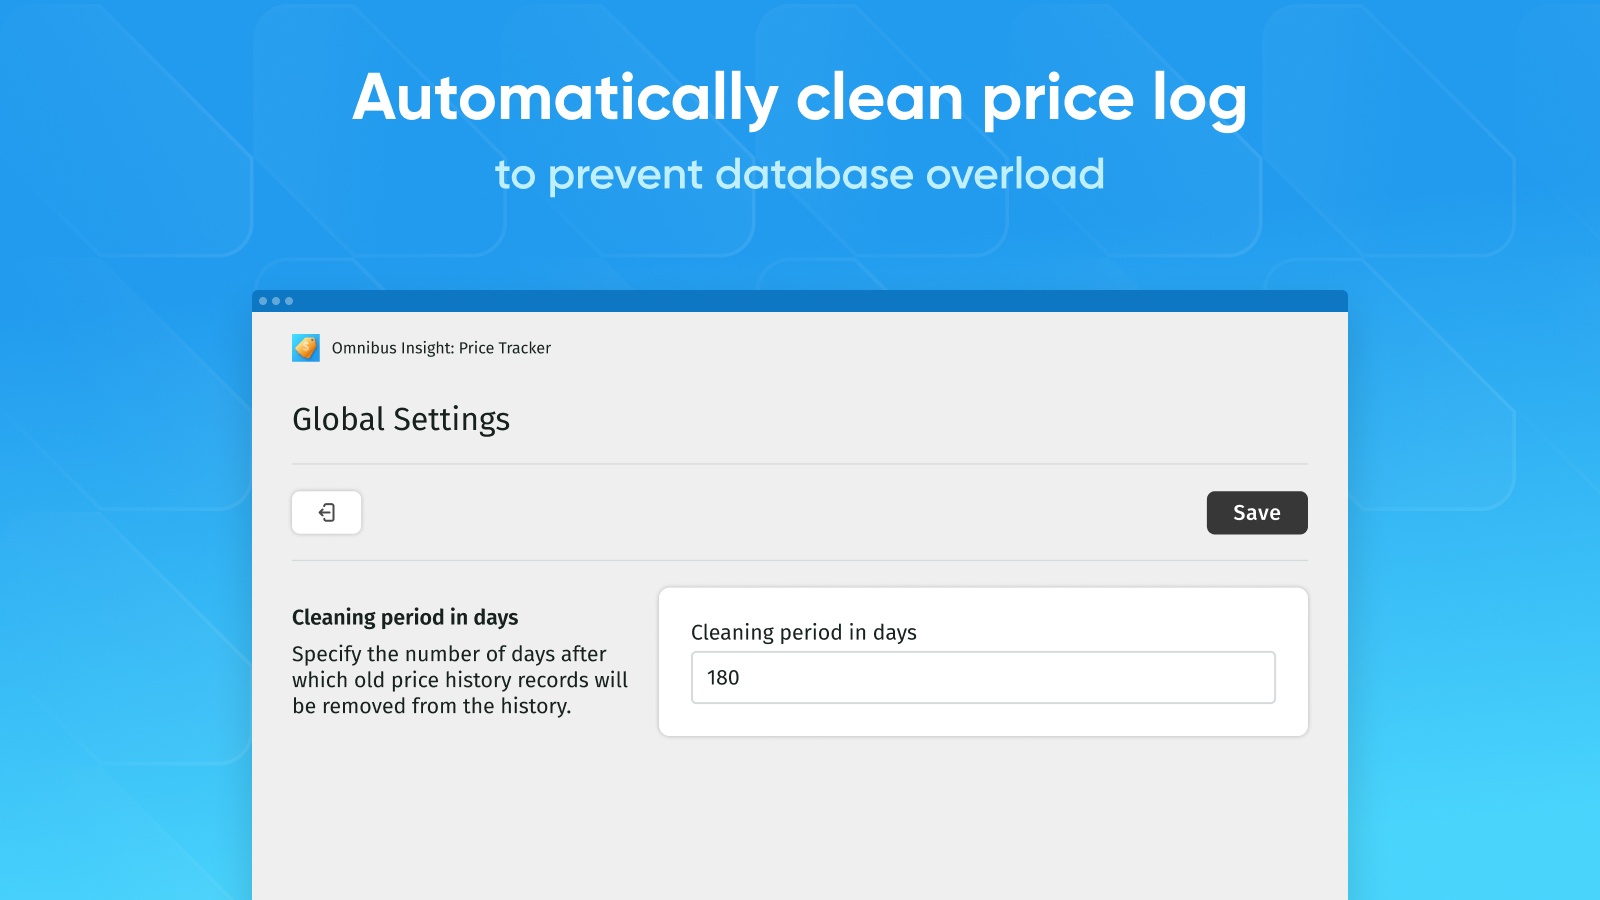 Automatically clean price log to prevent database overload